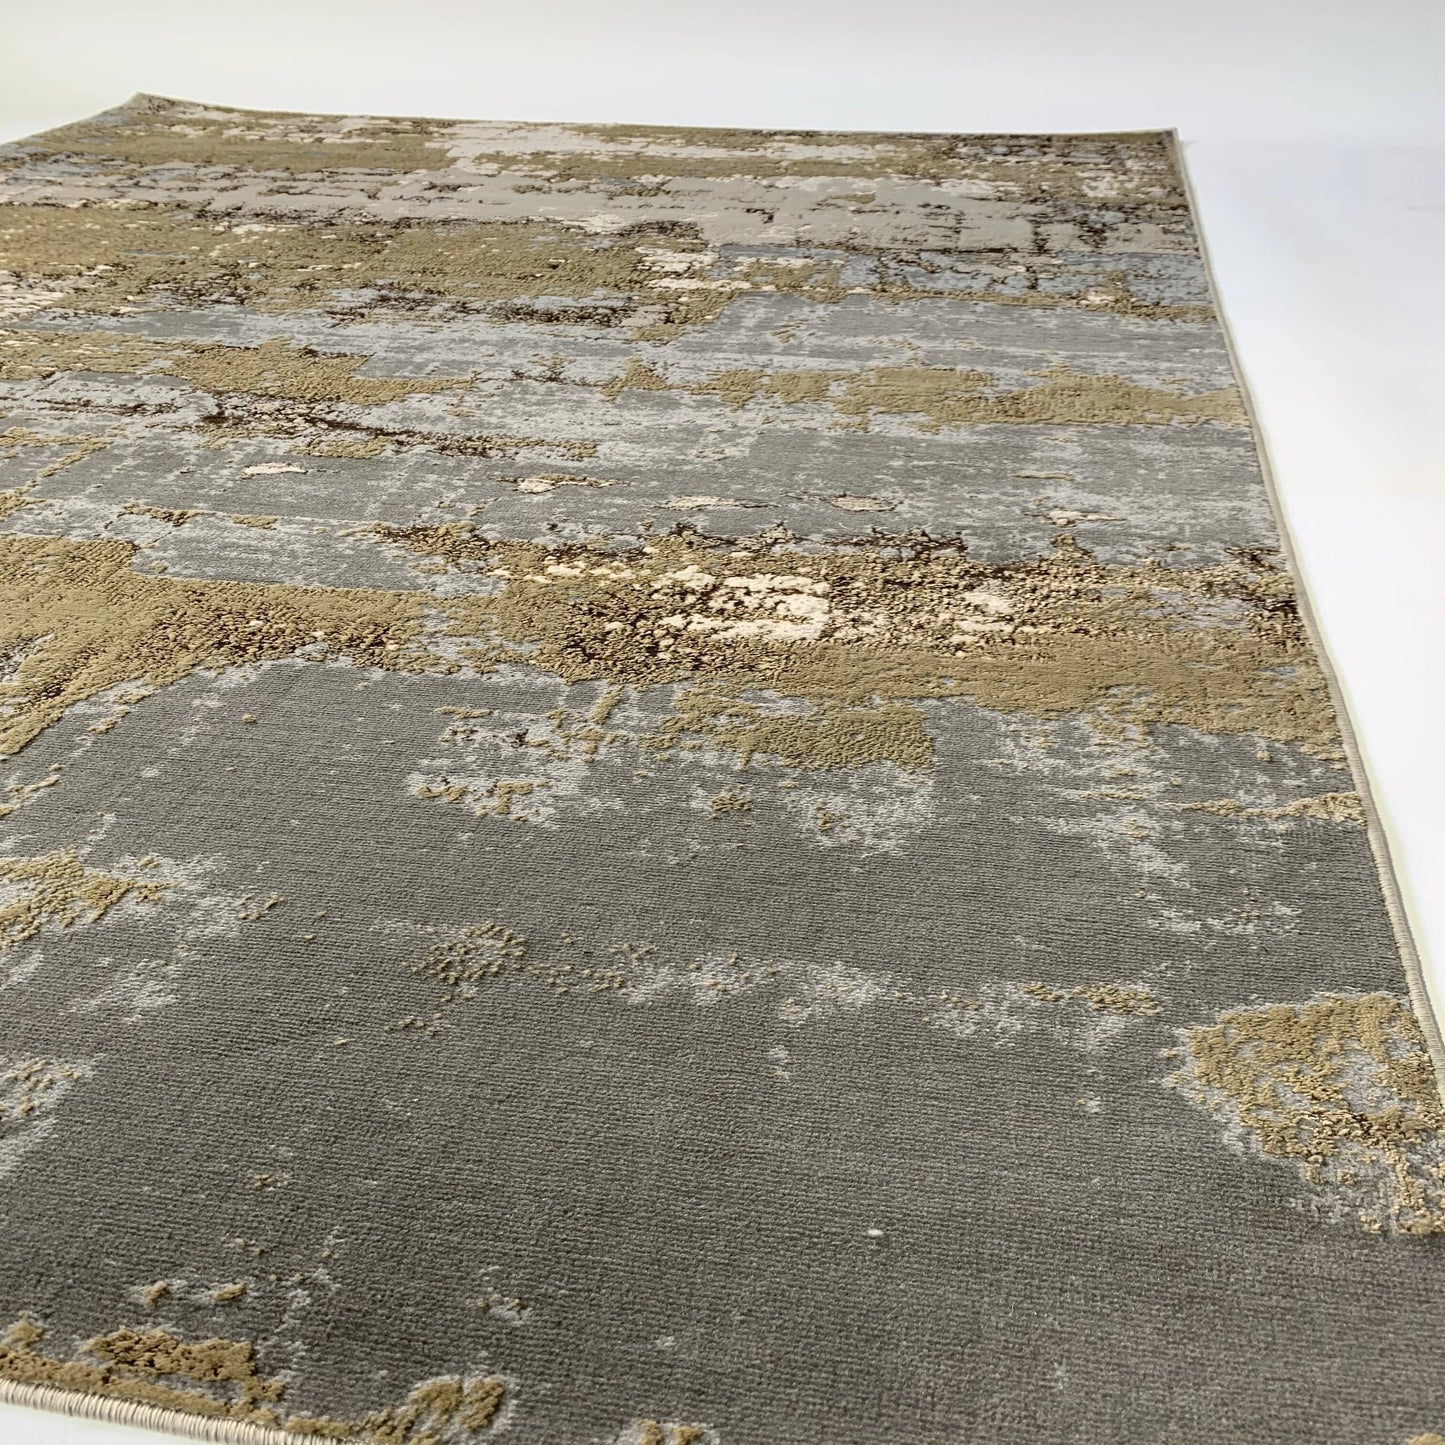 Golden Watercolor Changing Abstract Designed Soft Cozy Gray Beige  Area Rug/Carpet